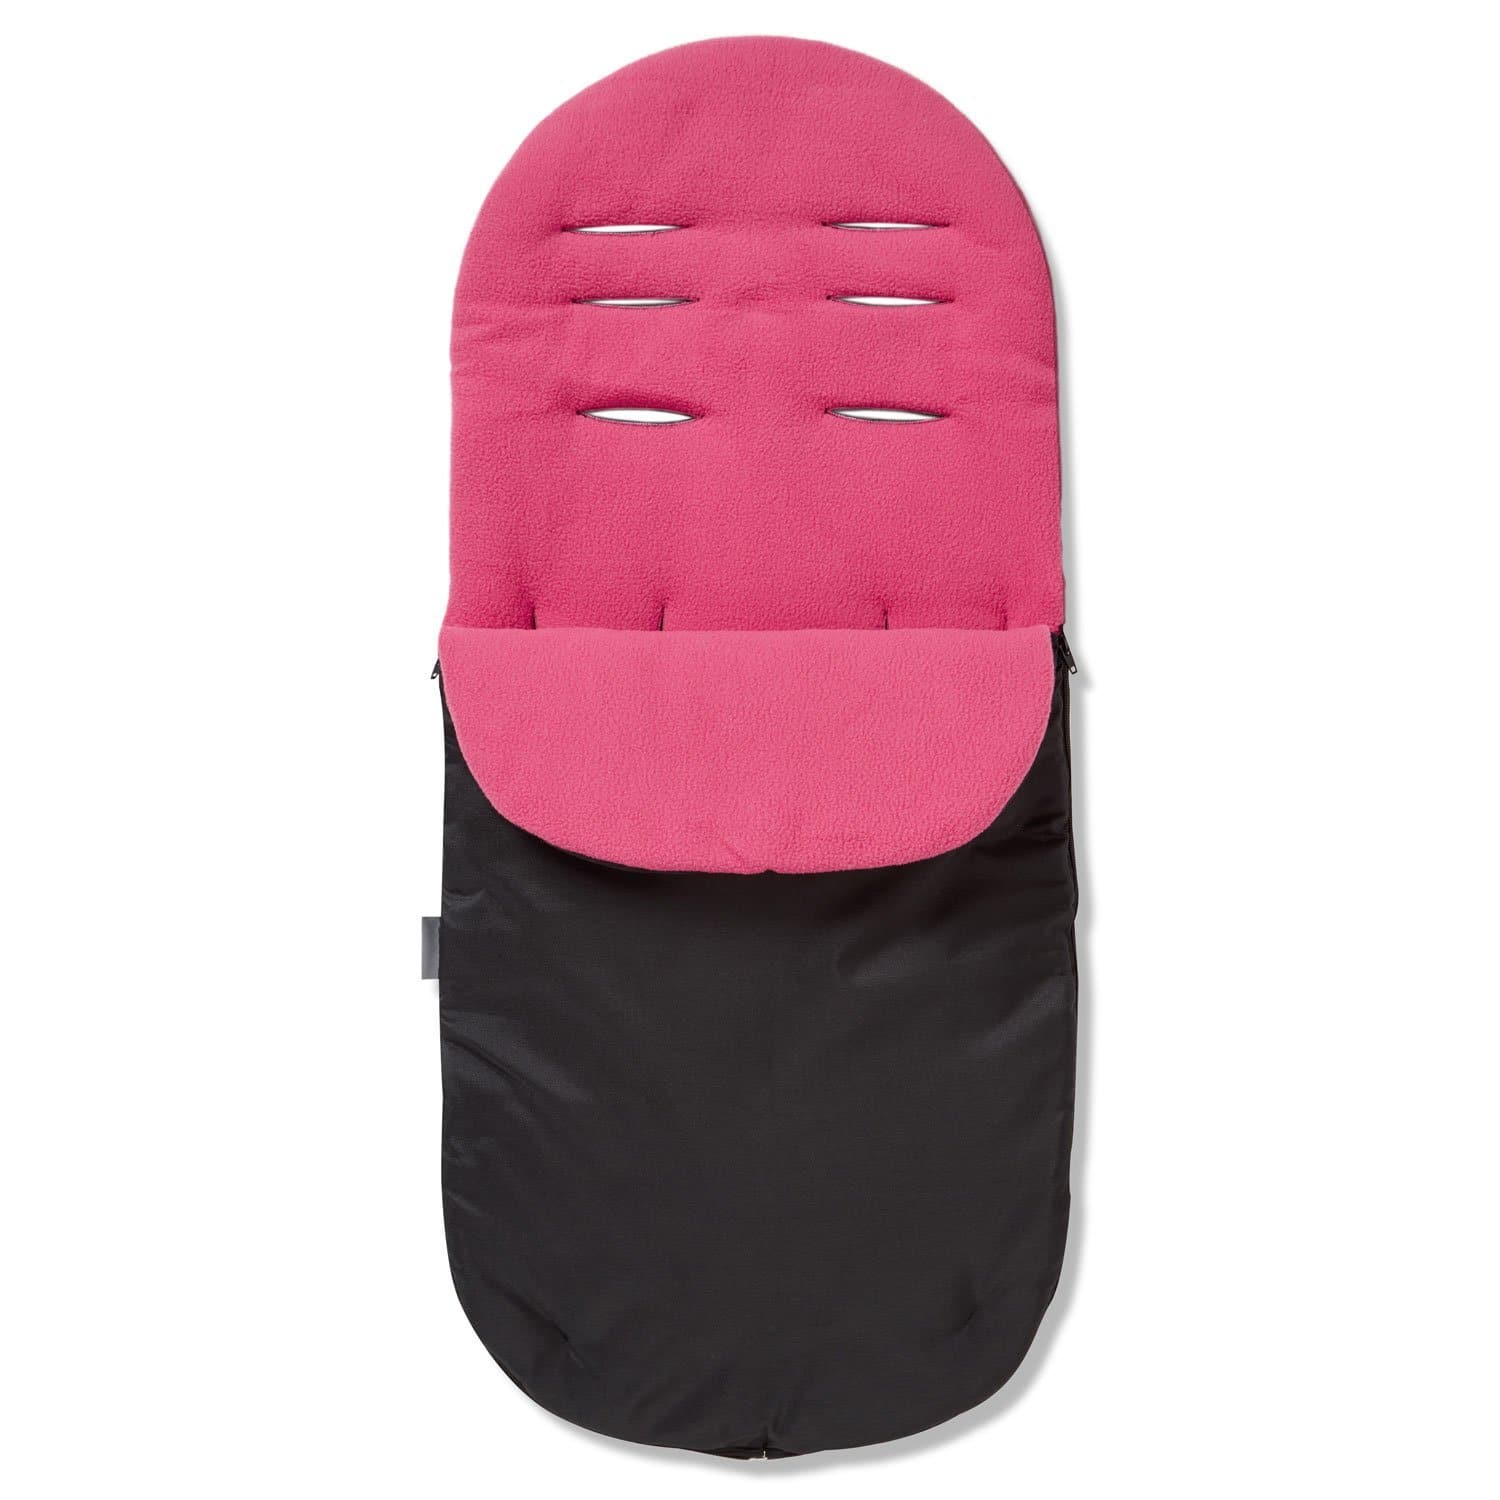 Footmuff / Cosy Toes Compatible with Bumbleride - Dark Pink / Fits All Models | For Your Little One